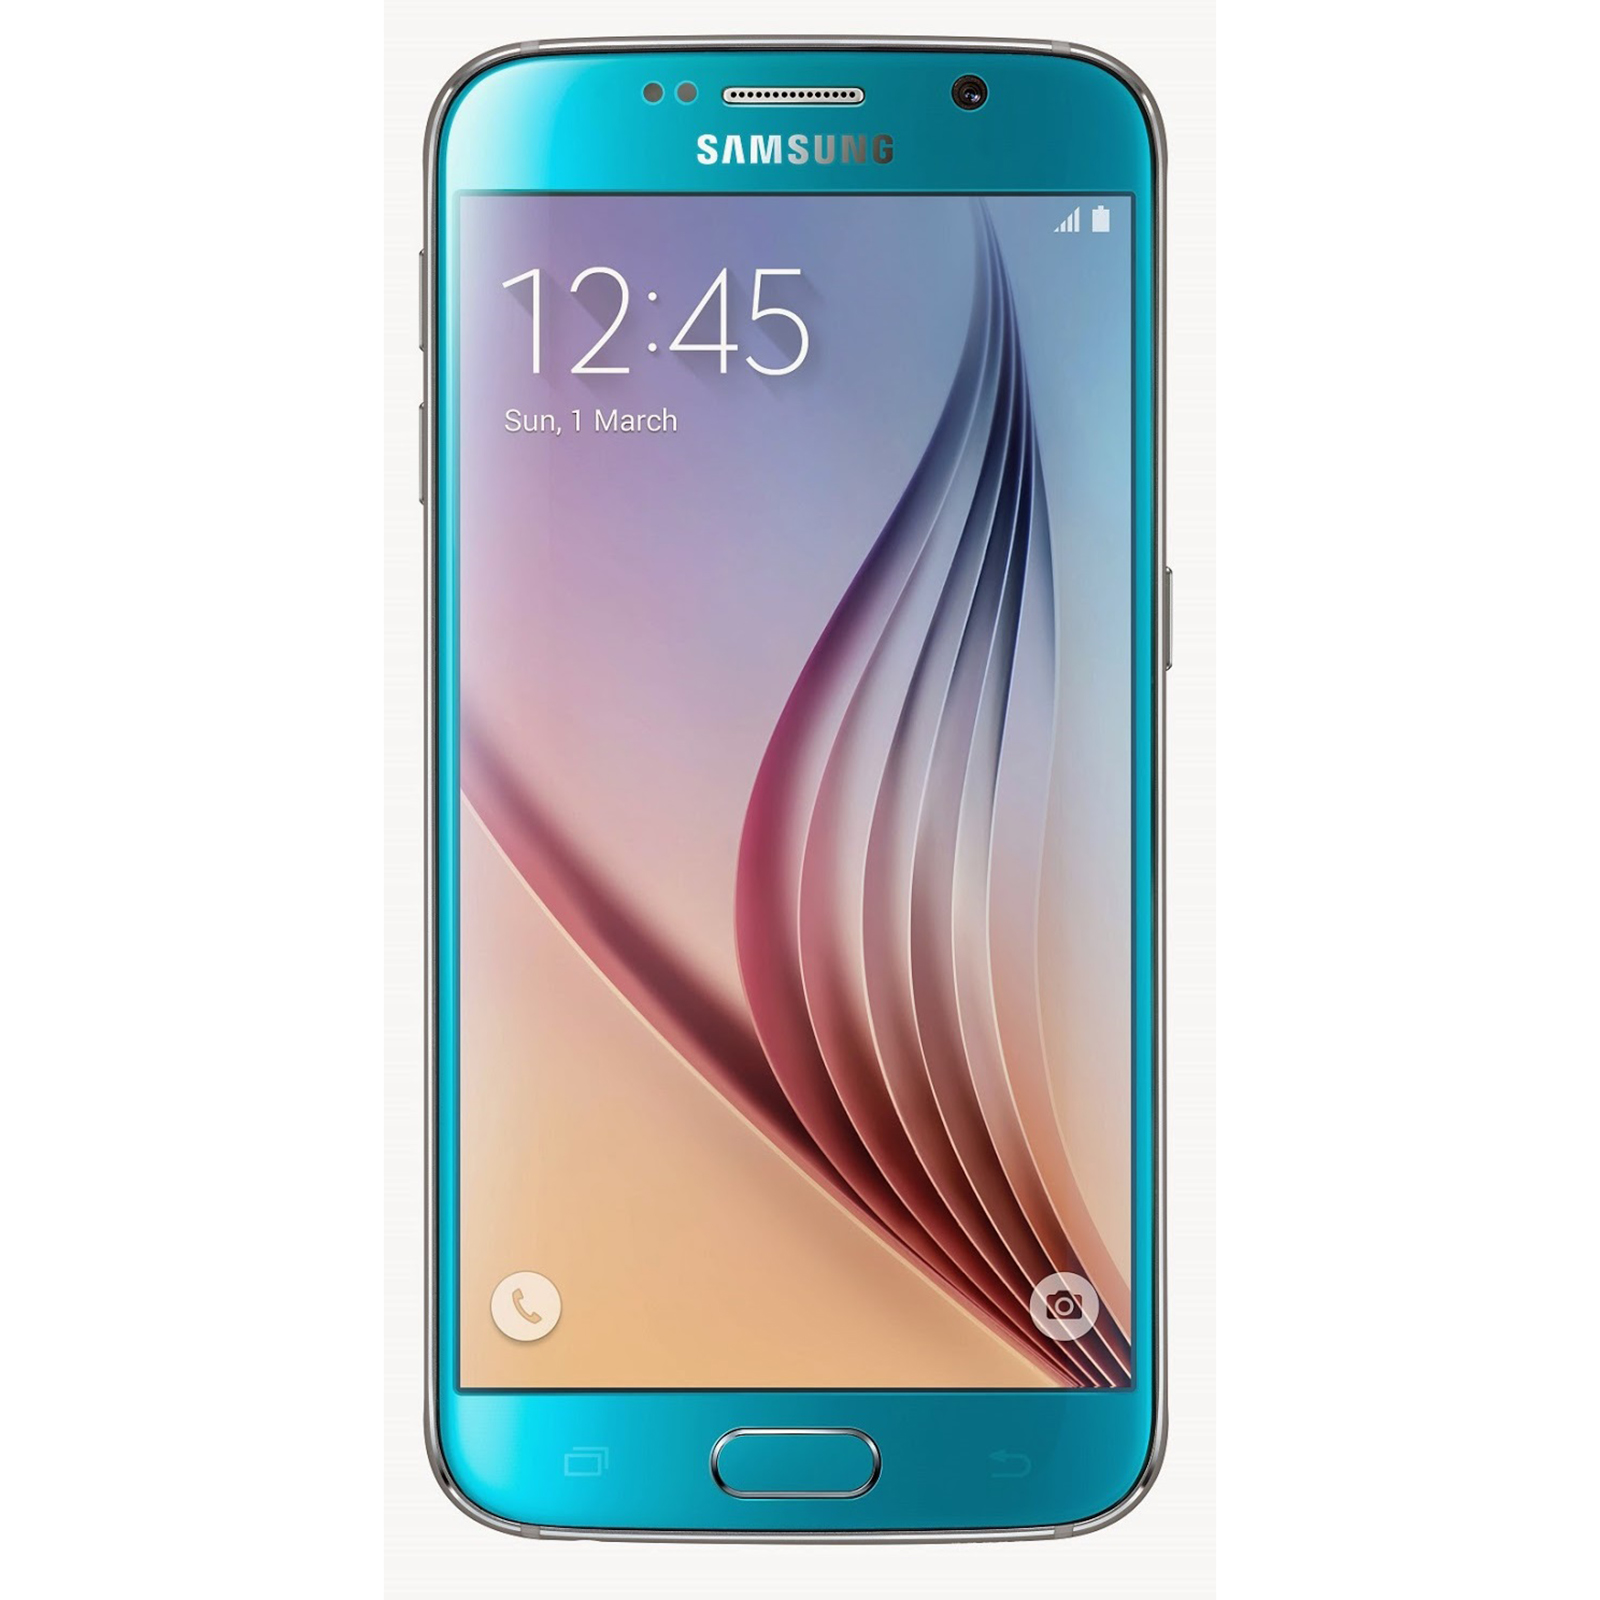 0737989980077 - SAMSUNG - GALAXY S6 4G WITH 32GB MEMORY CELL PHONE (UNLOCKED) - BLUE